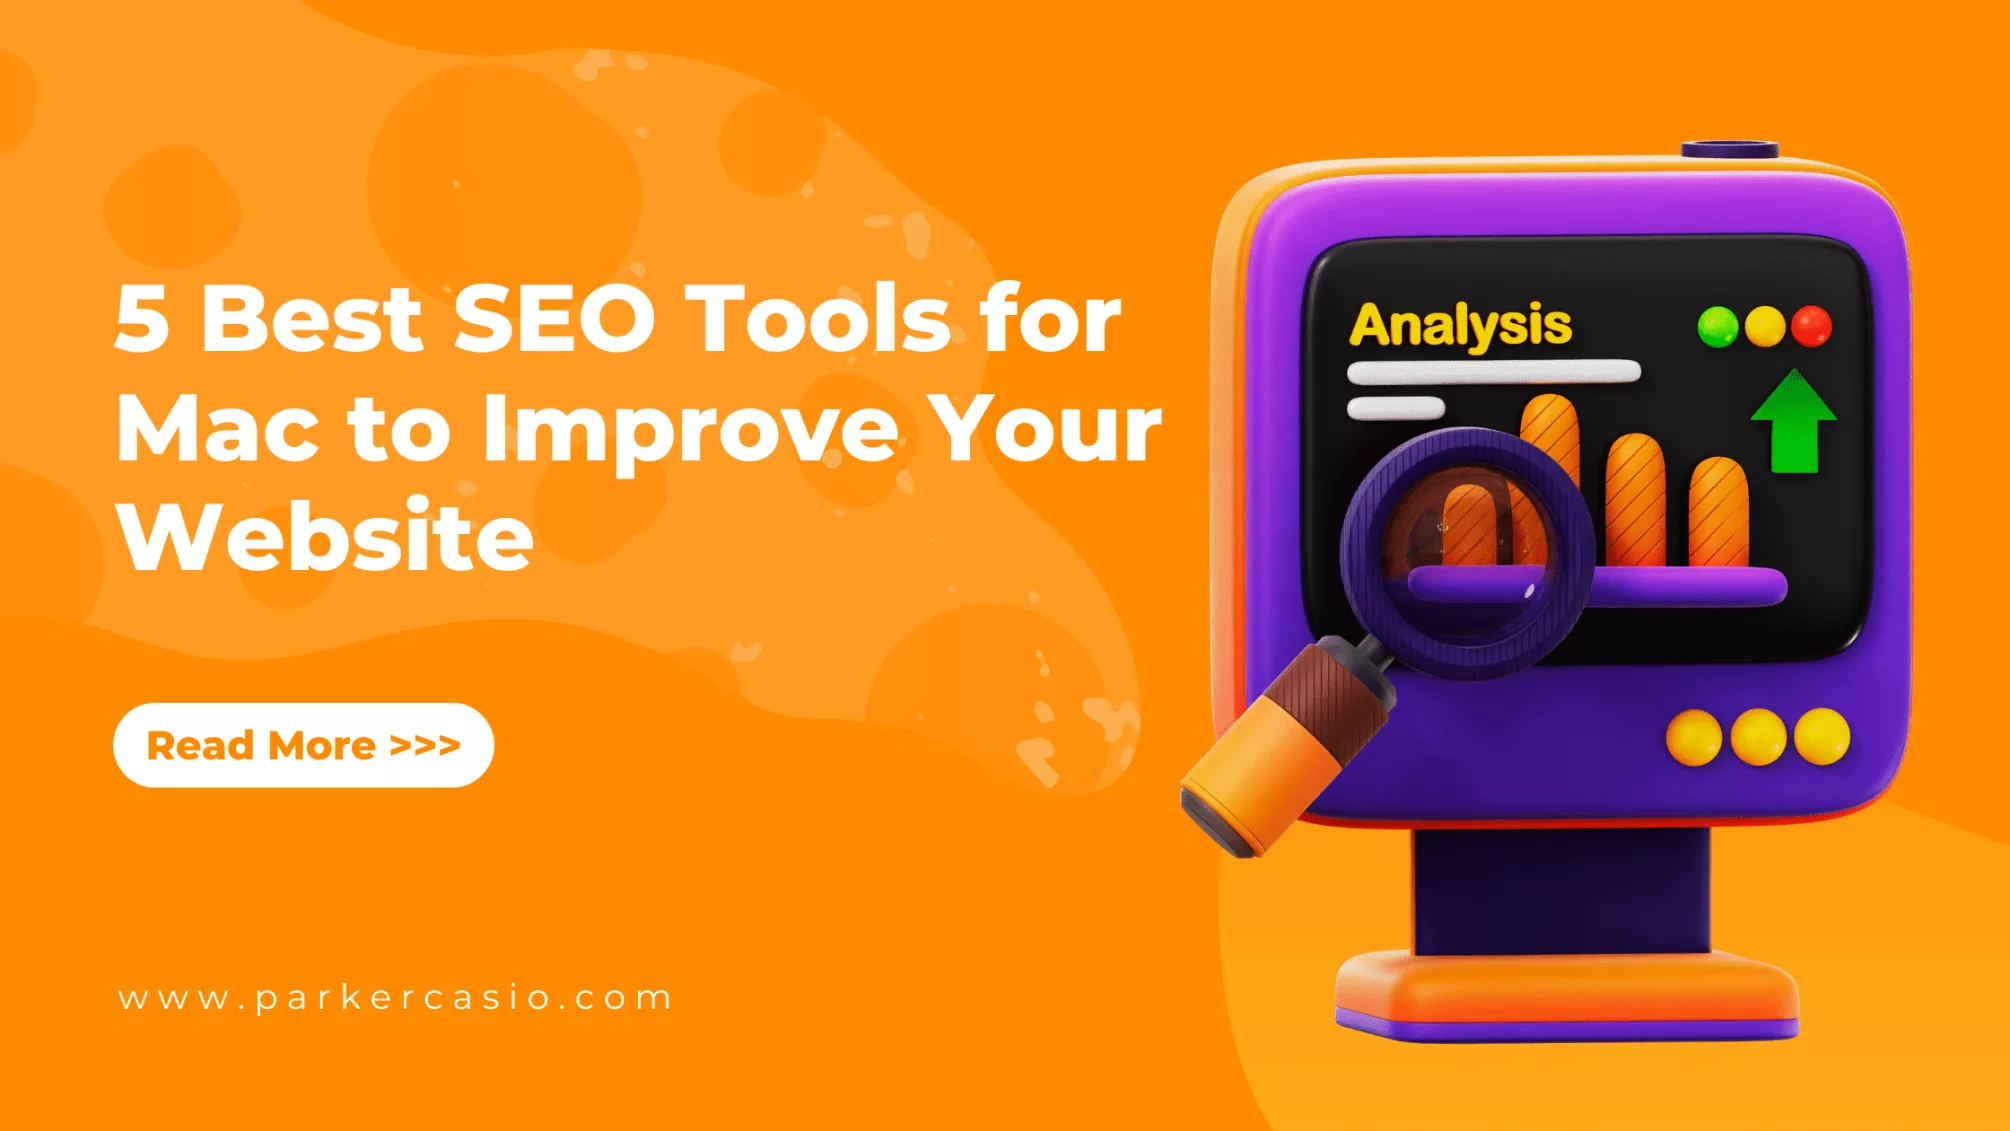 5 Best SEO Tools for Mac to Improve Your Website